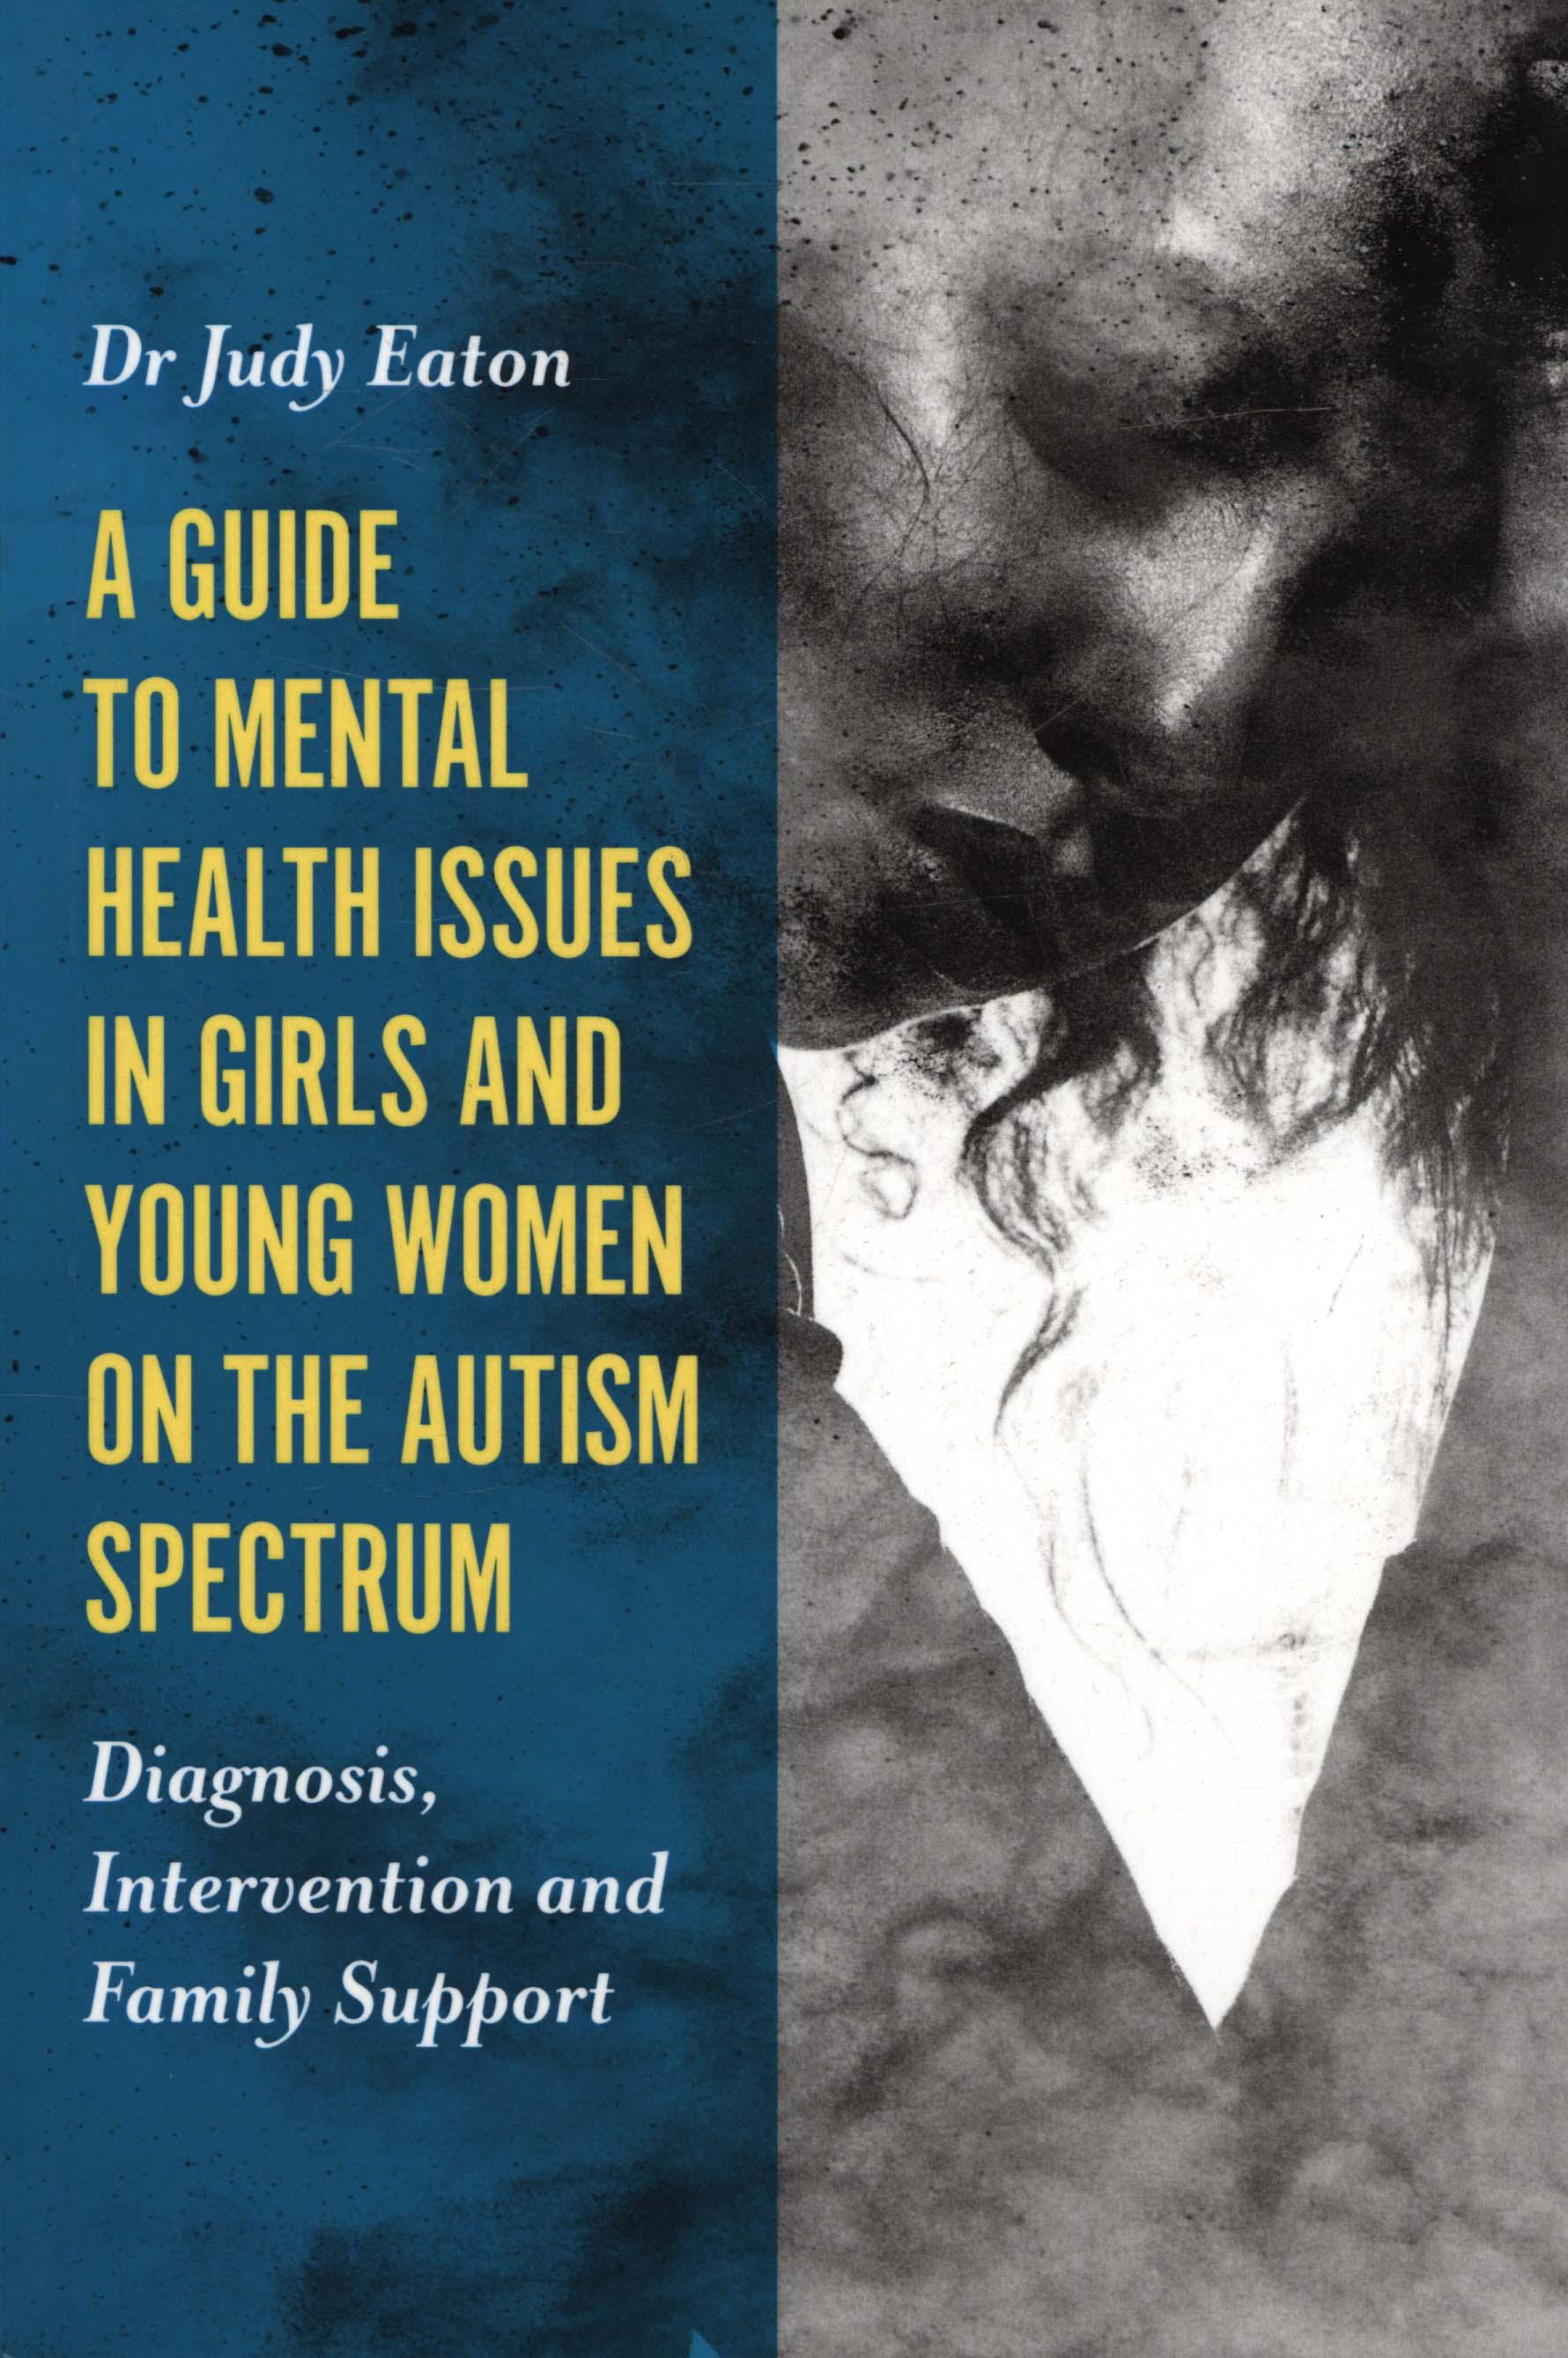 Guide to Mental Health Issues in Girls and Young Women on th